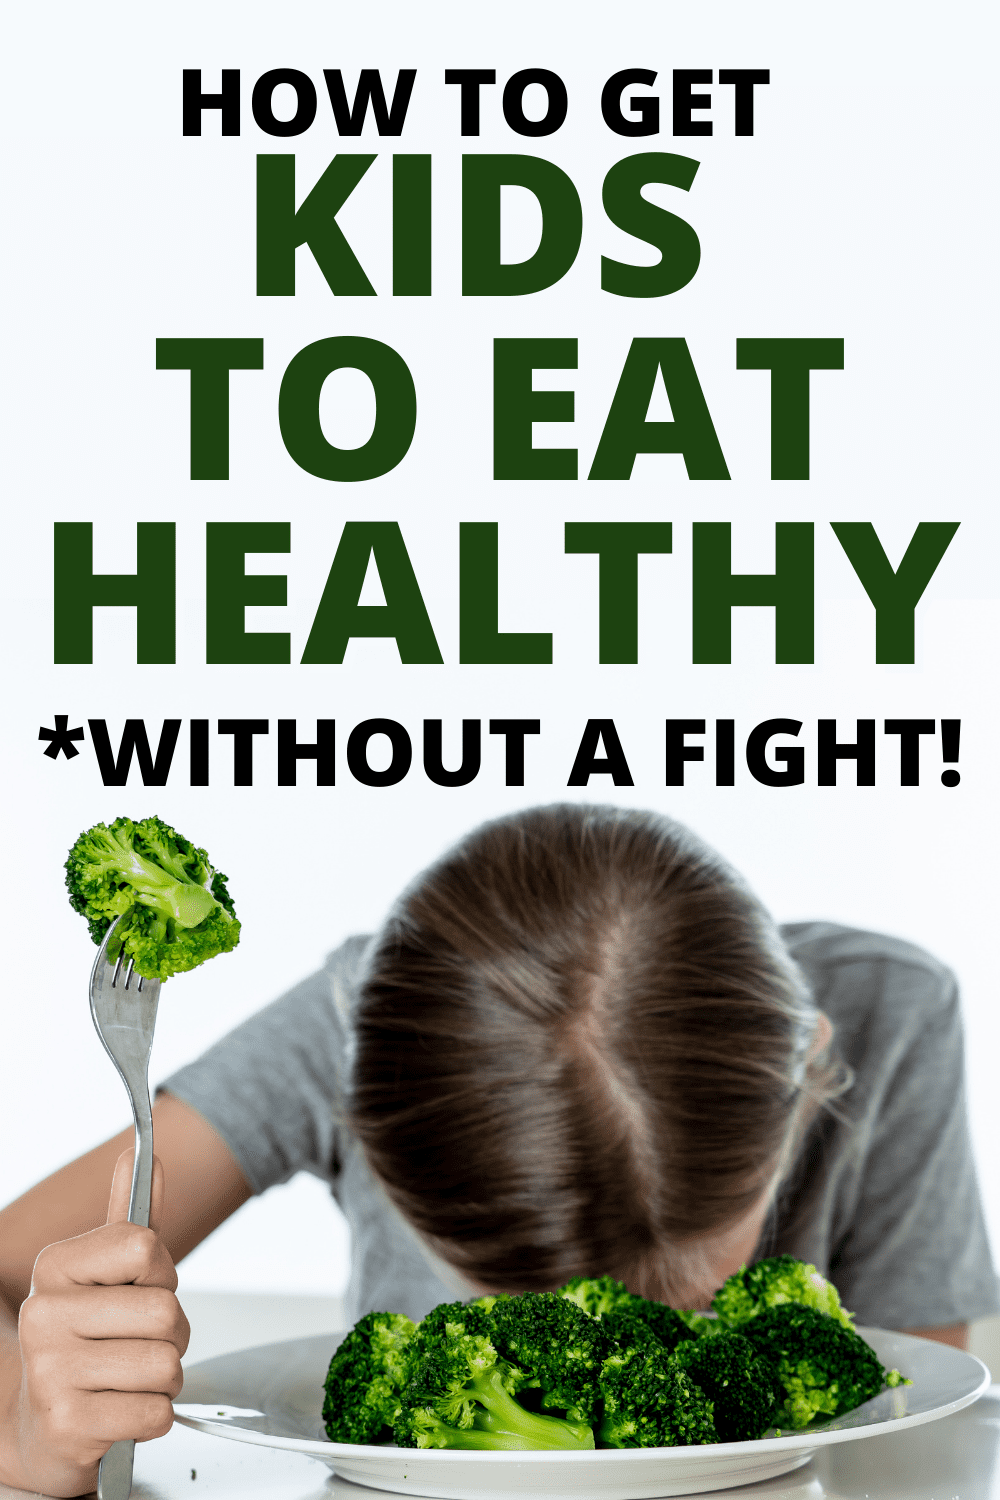 HEALTHY EATING TIPS FOR KIDS child eating broccoli on fork with head on table